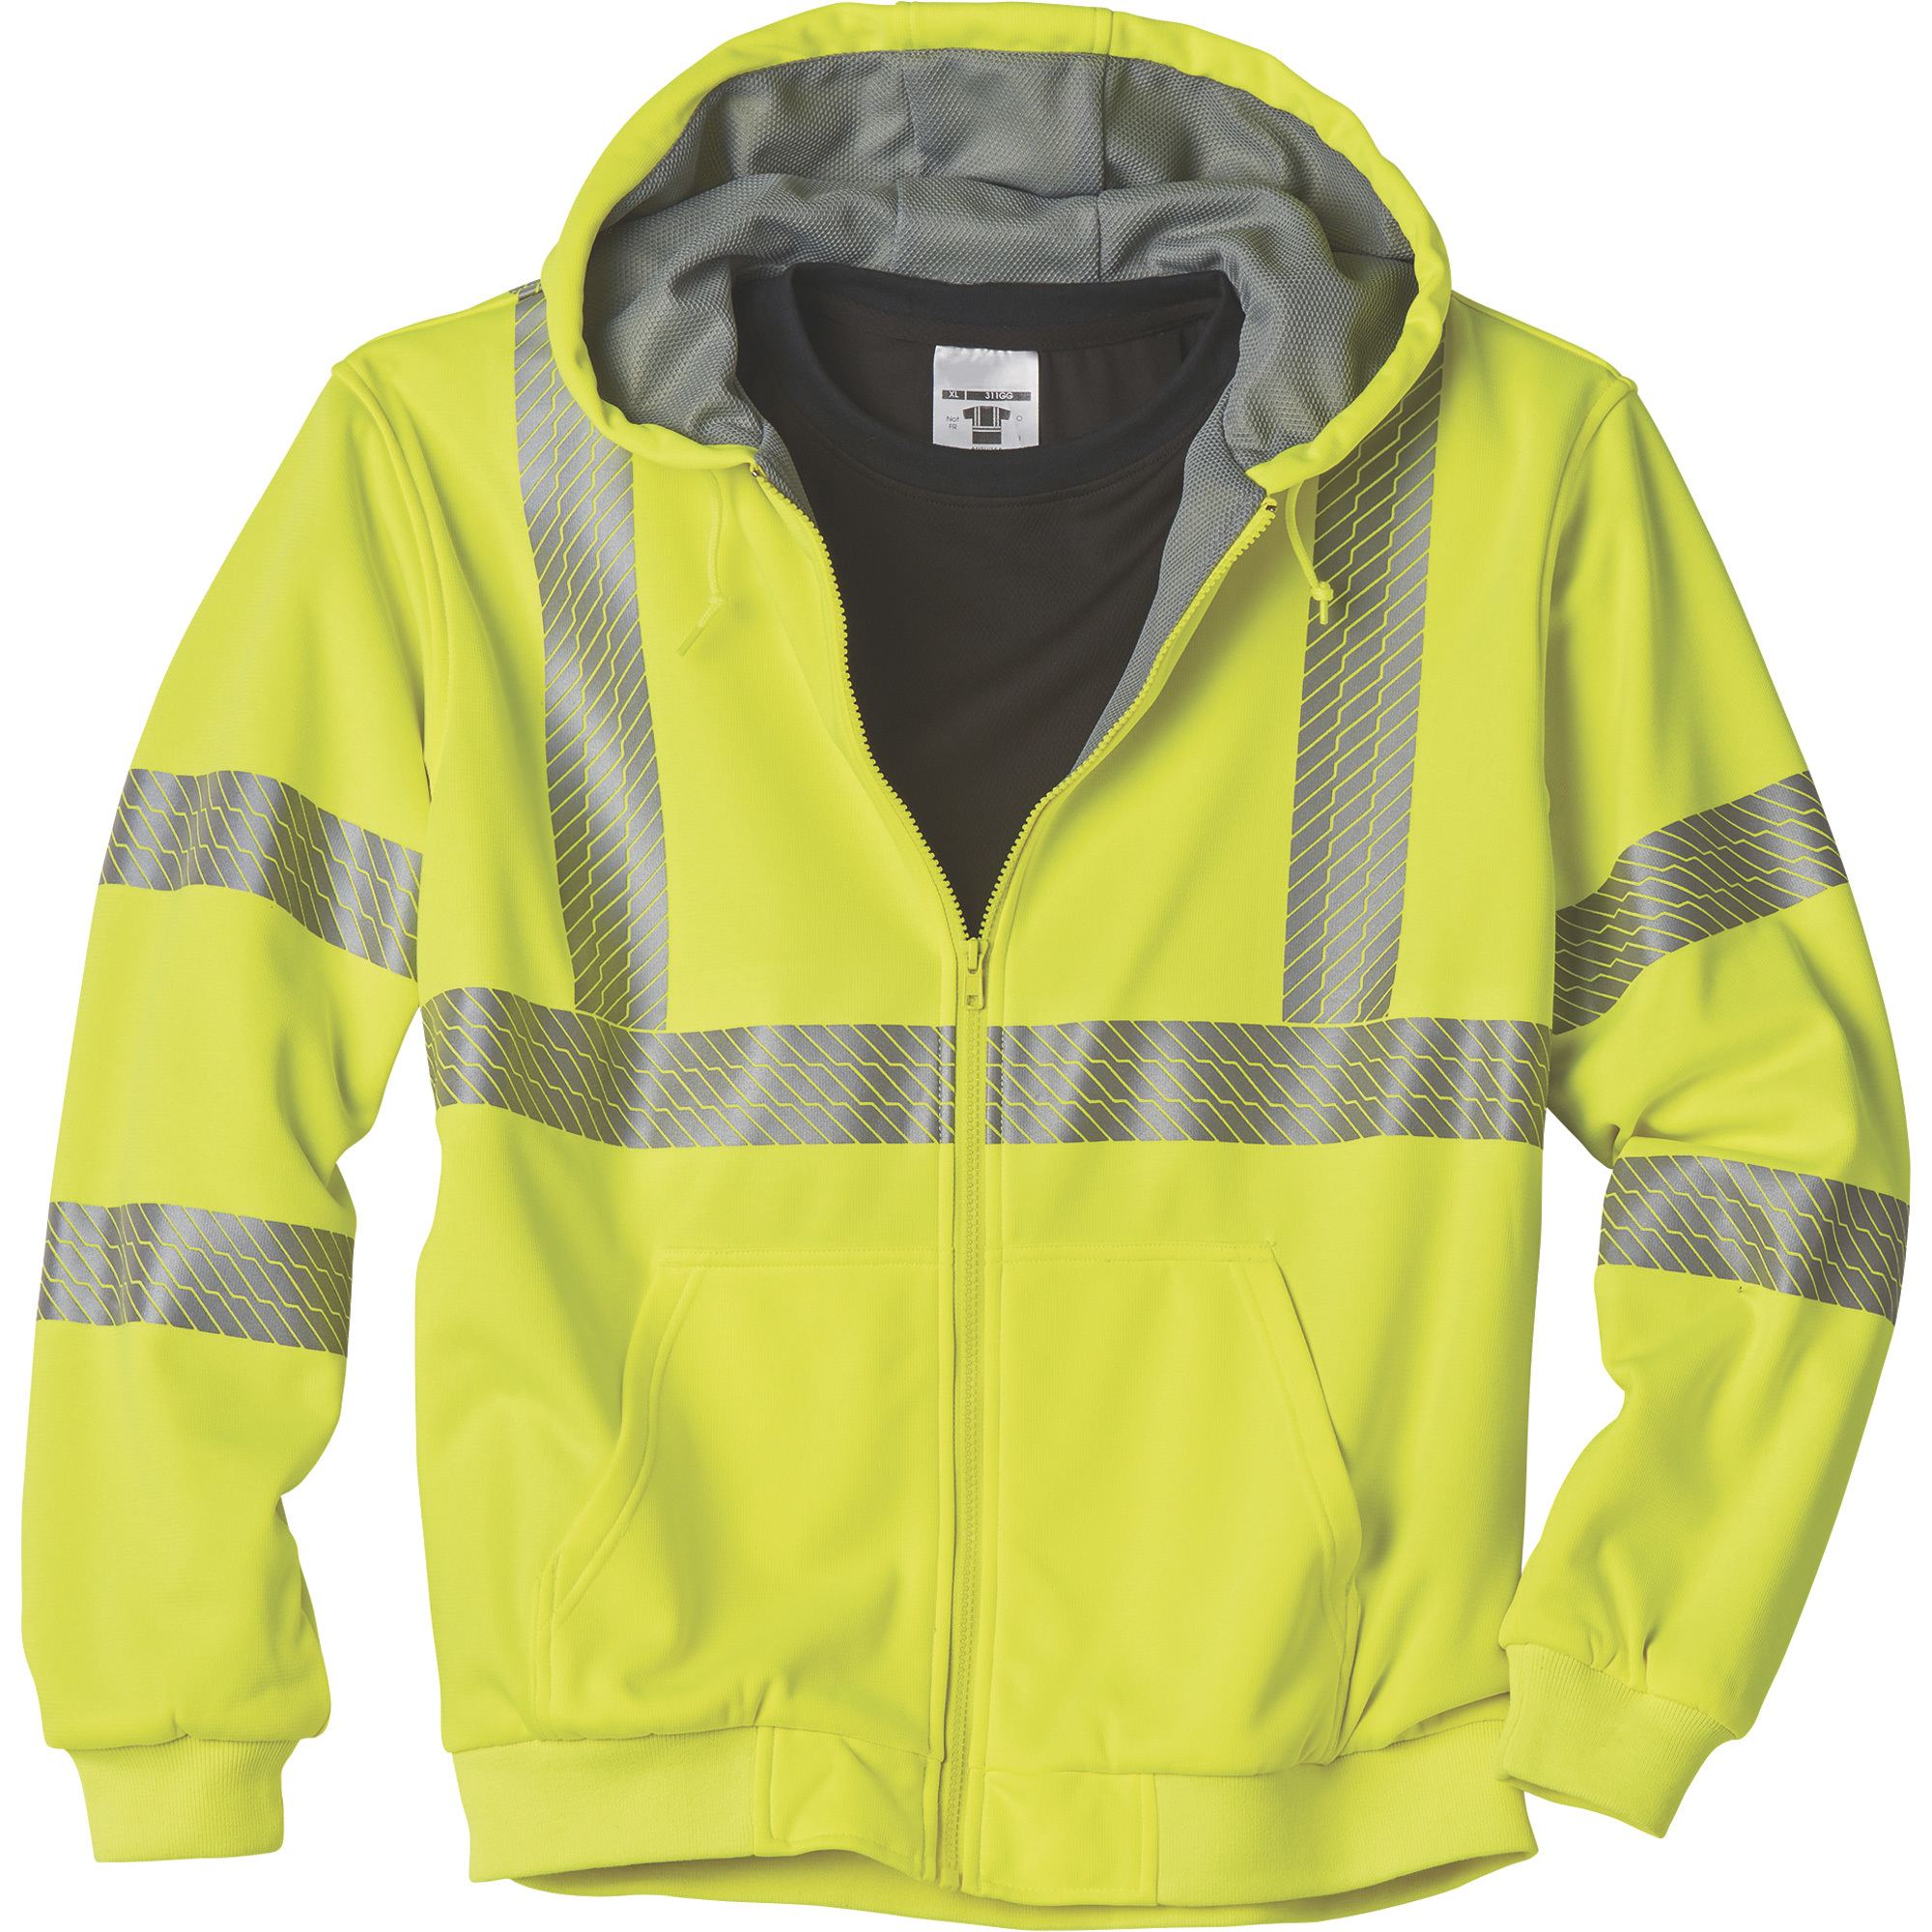 Tough Duck Safety Men's Class 3 High Visibility Thermal-Lined Hoodie â Lime, XL